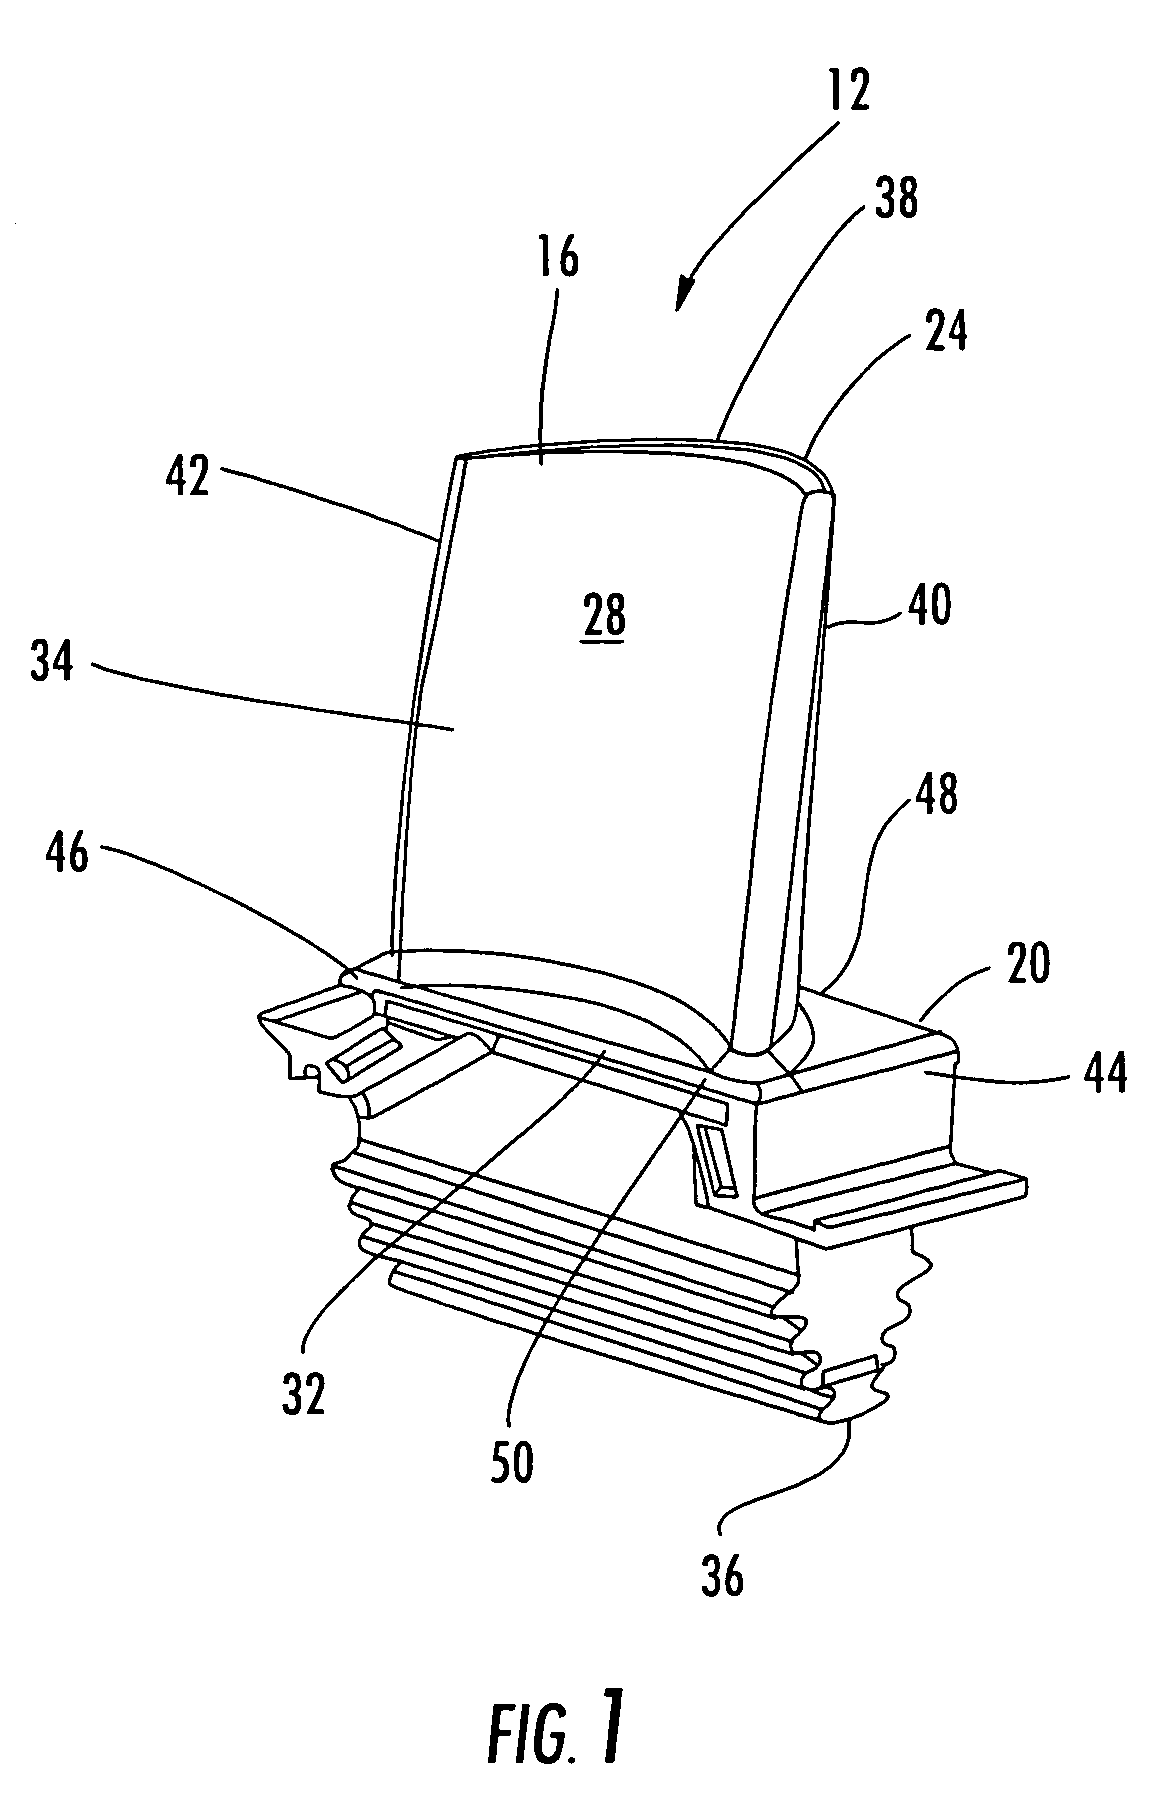 Turbine airfoil cooling system with platform cooling channels with diffusion slots